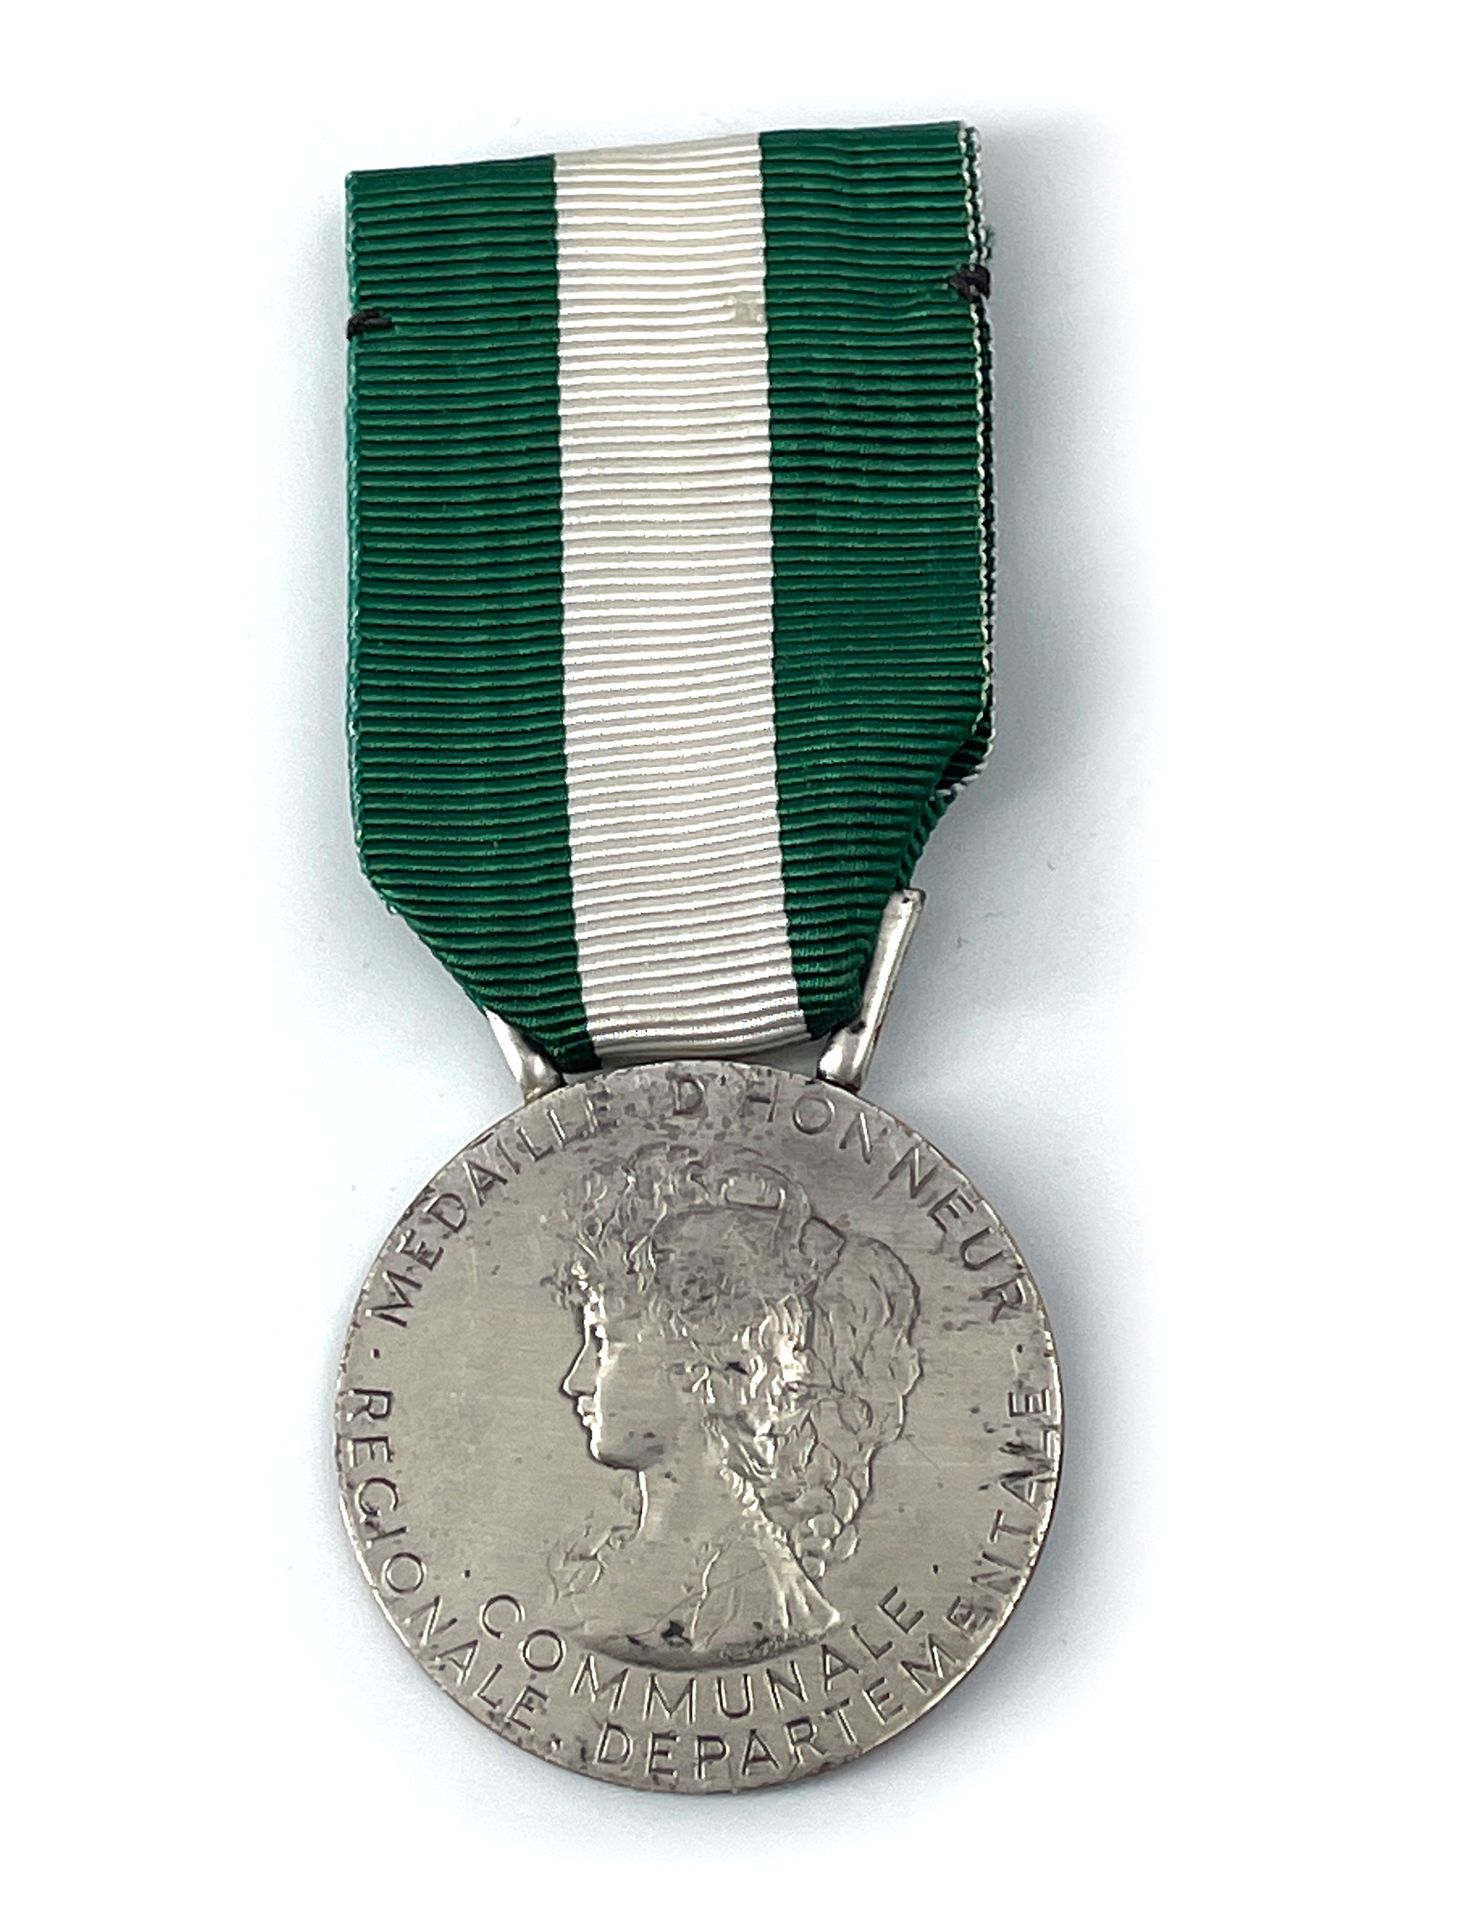 Null Silver medal of regional, departmental and communal honor. Attributed to th&hellip;